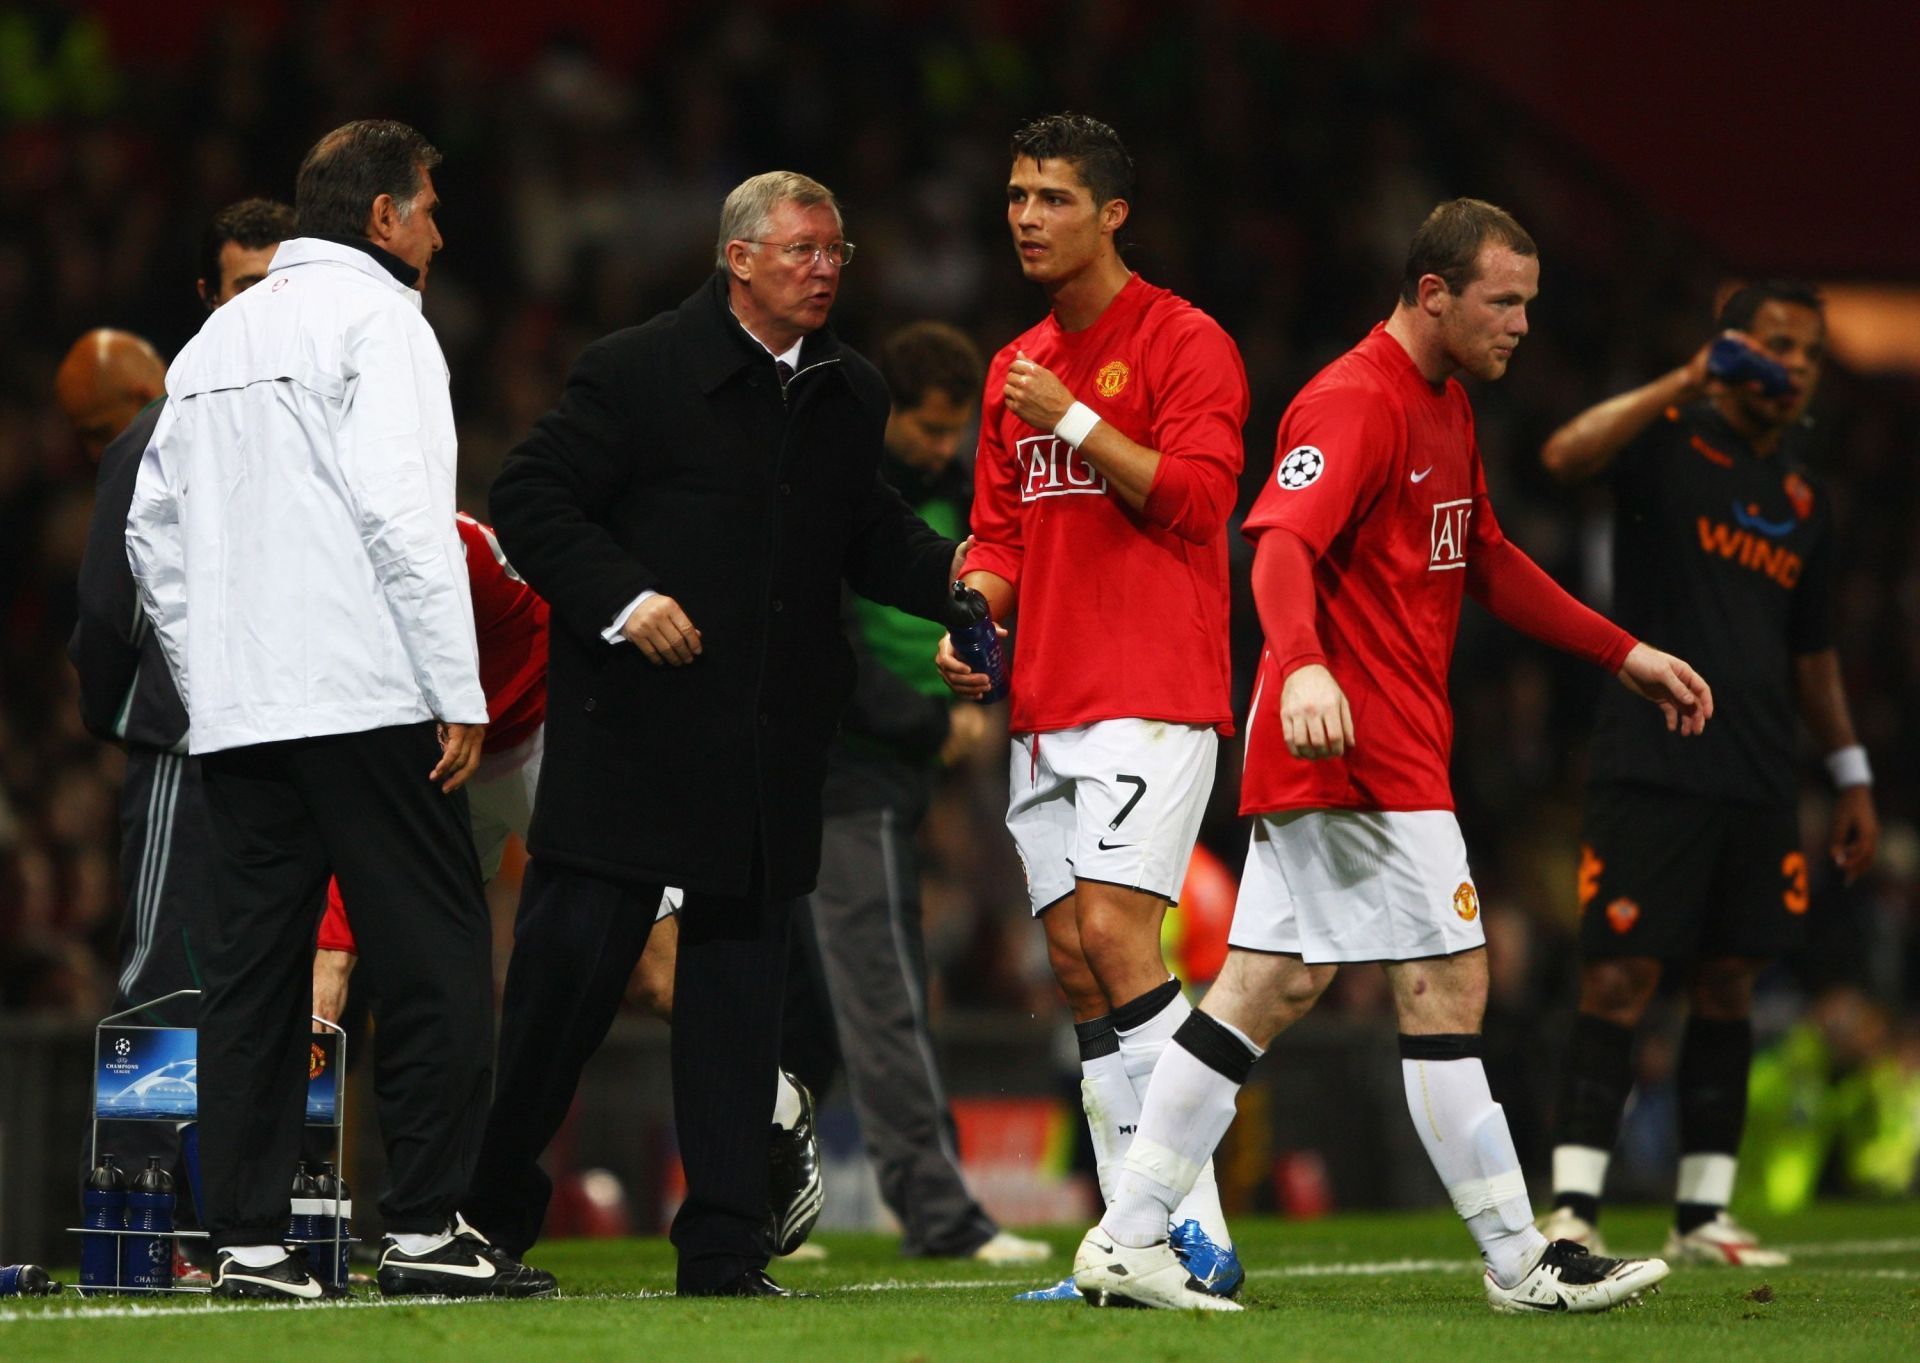 Sir Alex Ferguson with Cristiano Ronaldo and Wayne Rooney during a Champions League game against Roma.